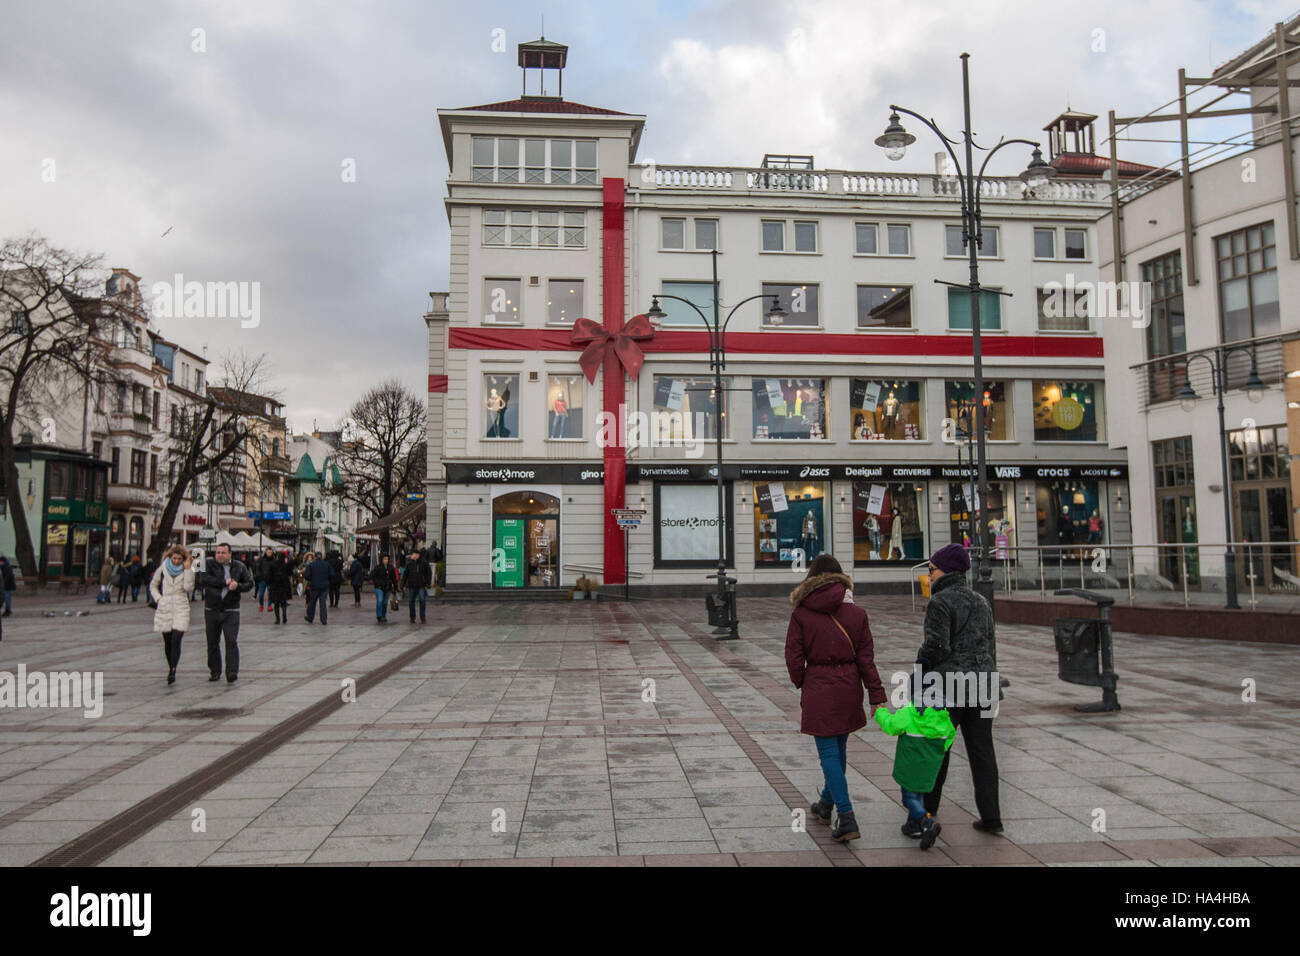 Sopot, Poland 27 November 2016 Cold day in Sopot. People walking in winter clothes at the Plac Zdrojowy are seen. Meteorologists predict high snow fall in nex few hours. Credit:  Michal Fludra/Alamy Live News Stock Photo